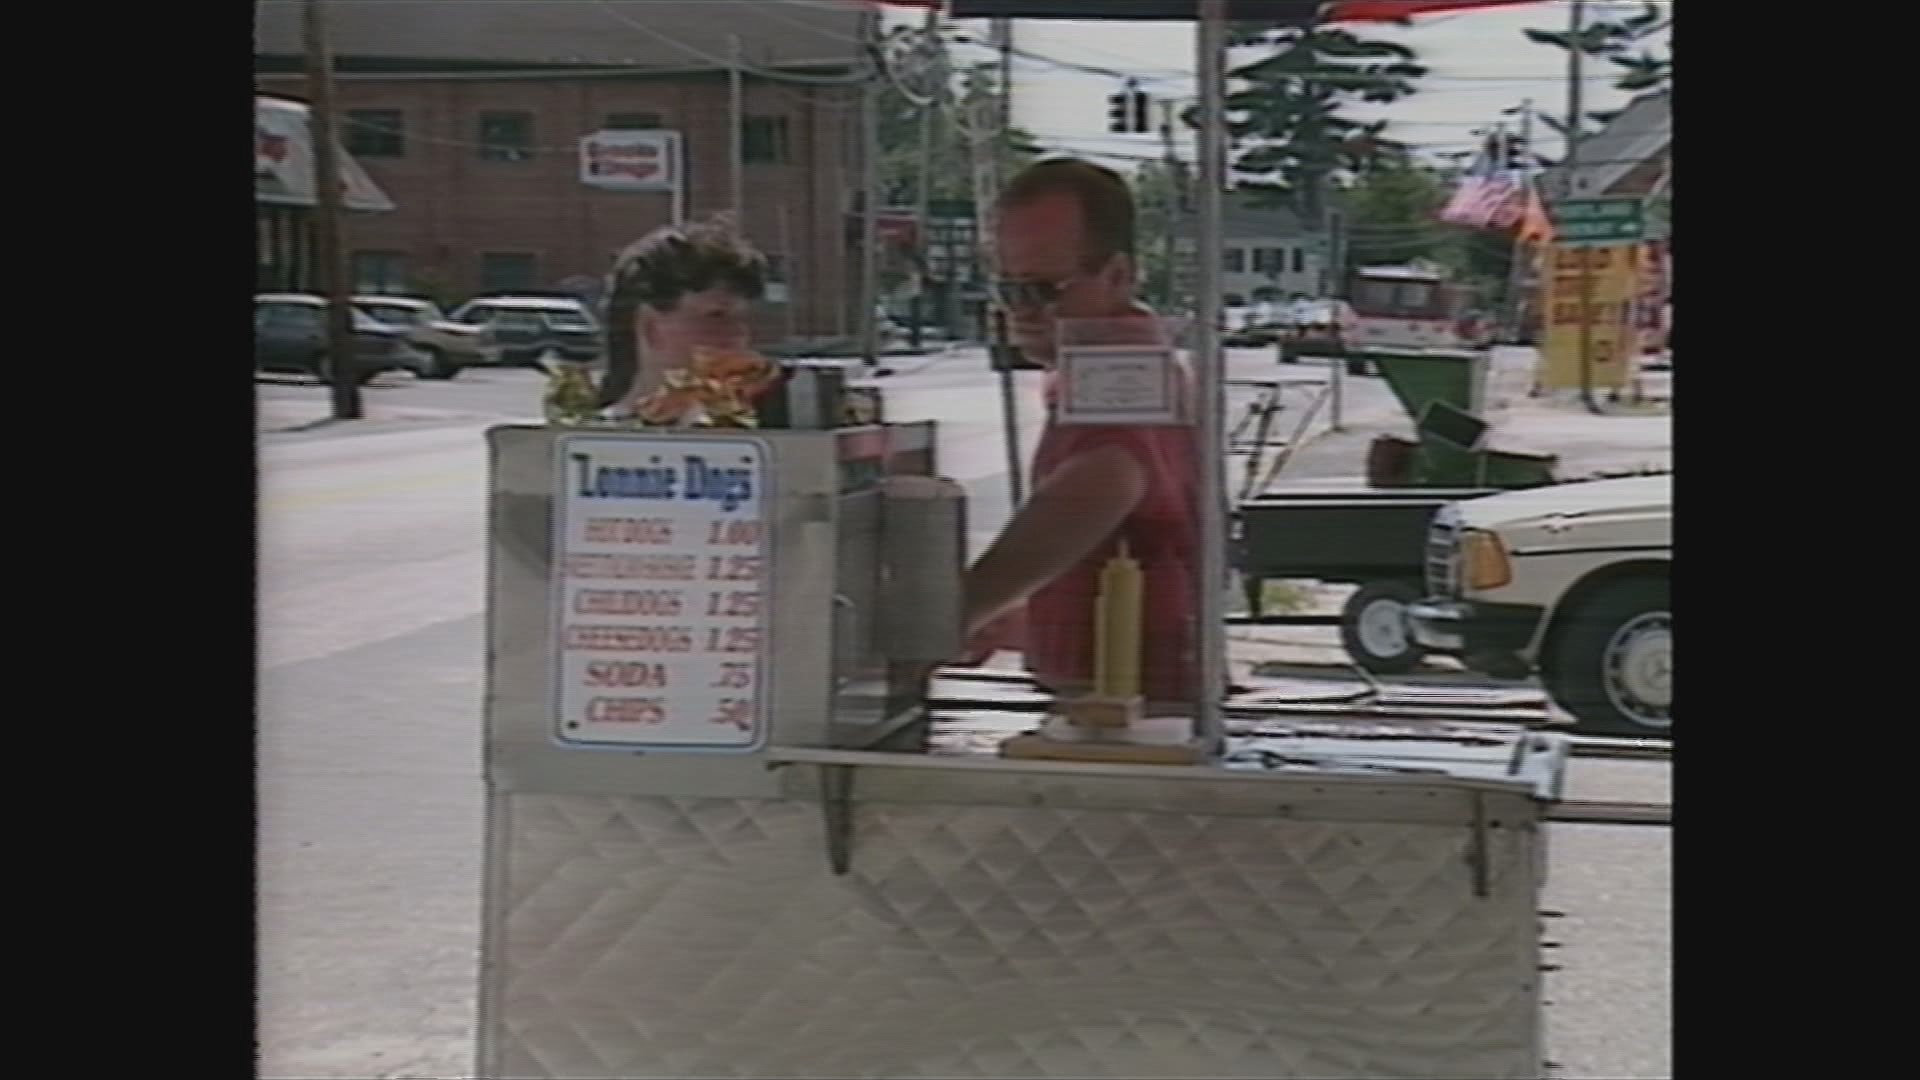 Lonnie Dogs in Gray 1992 story by NEWS CENTER Maine's Jane Skinner